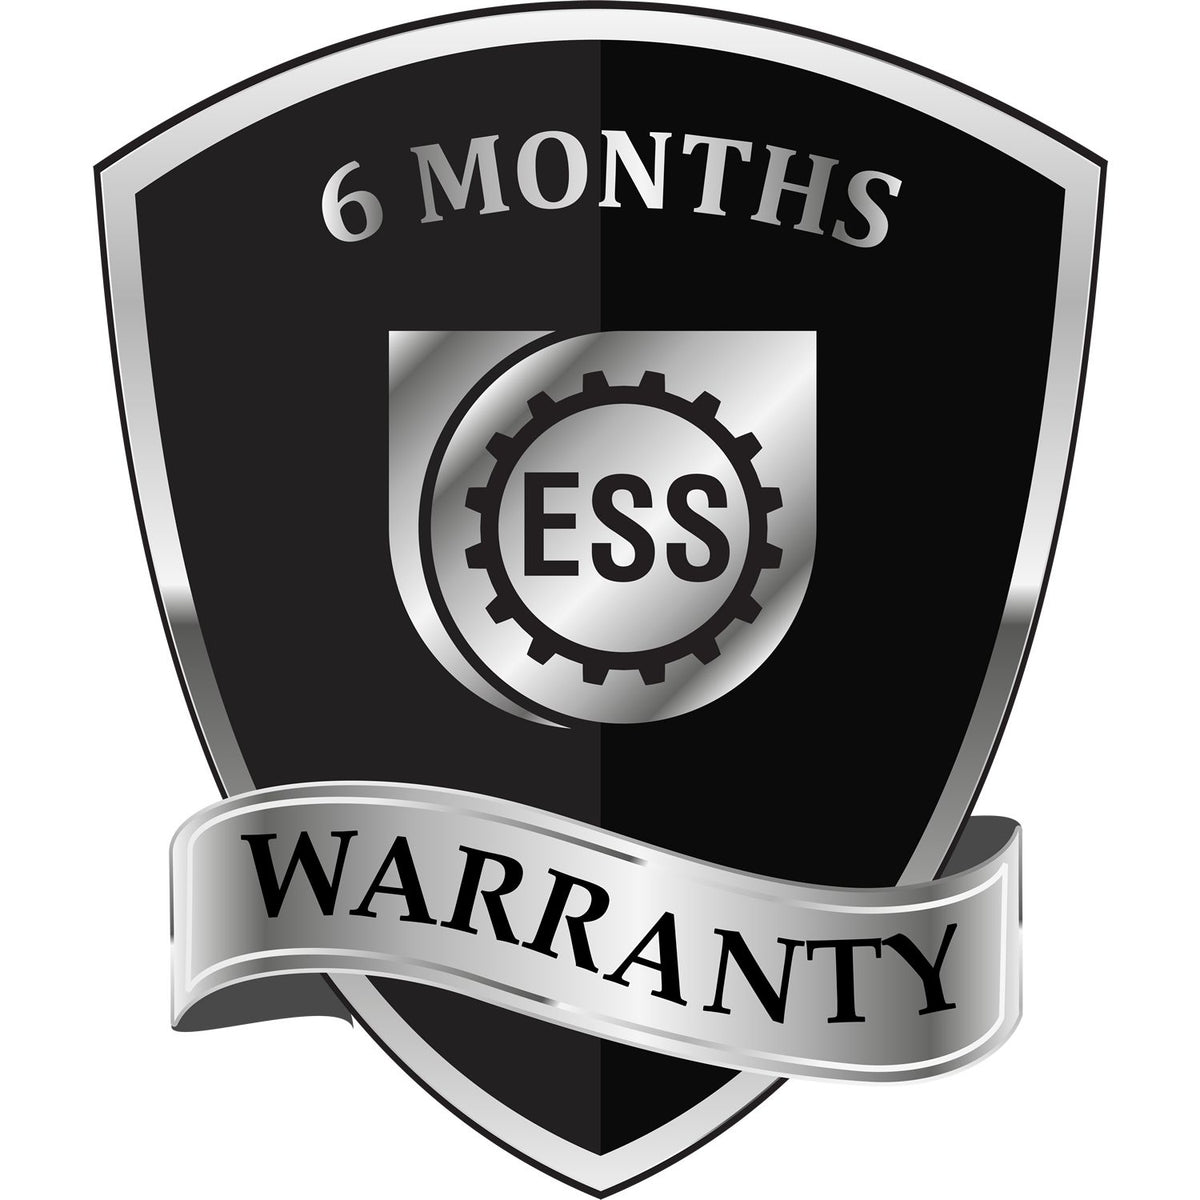 A black and silver badge or emblem showing warranty information for the South Carolina Professional Geologist Seal Stamp